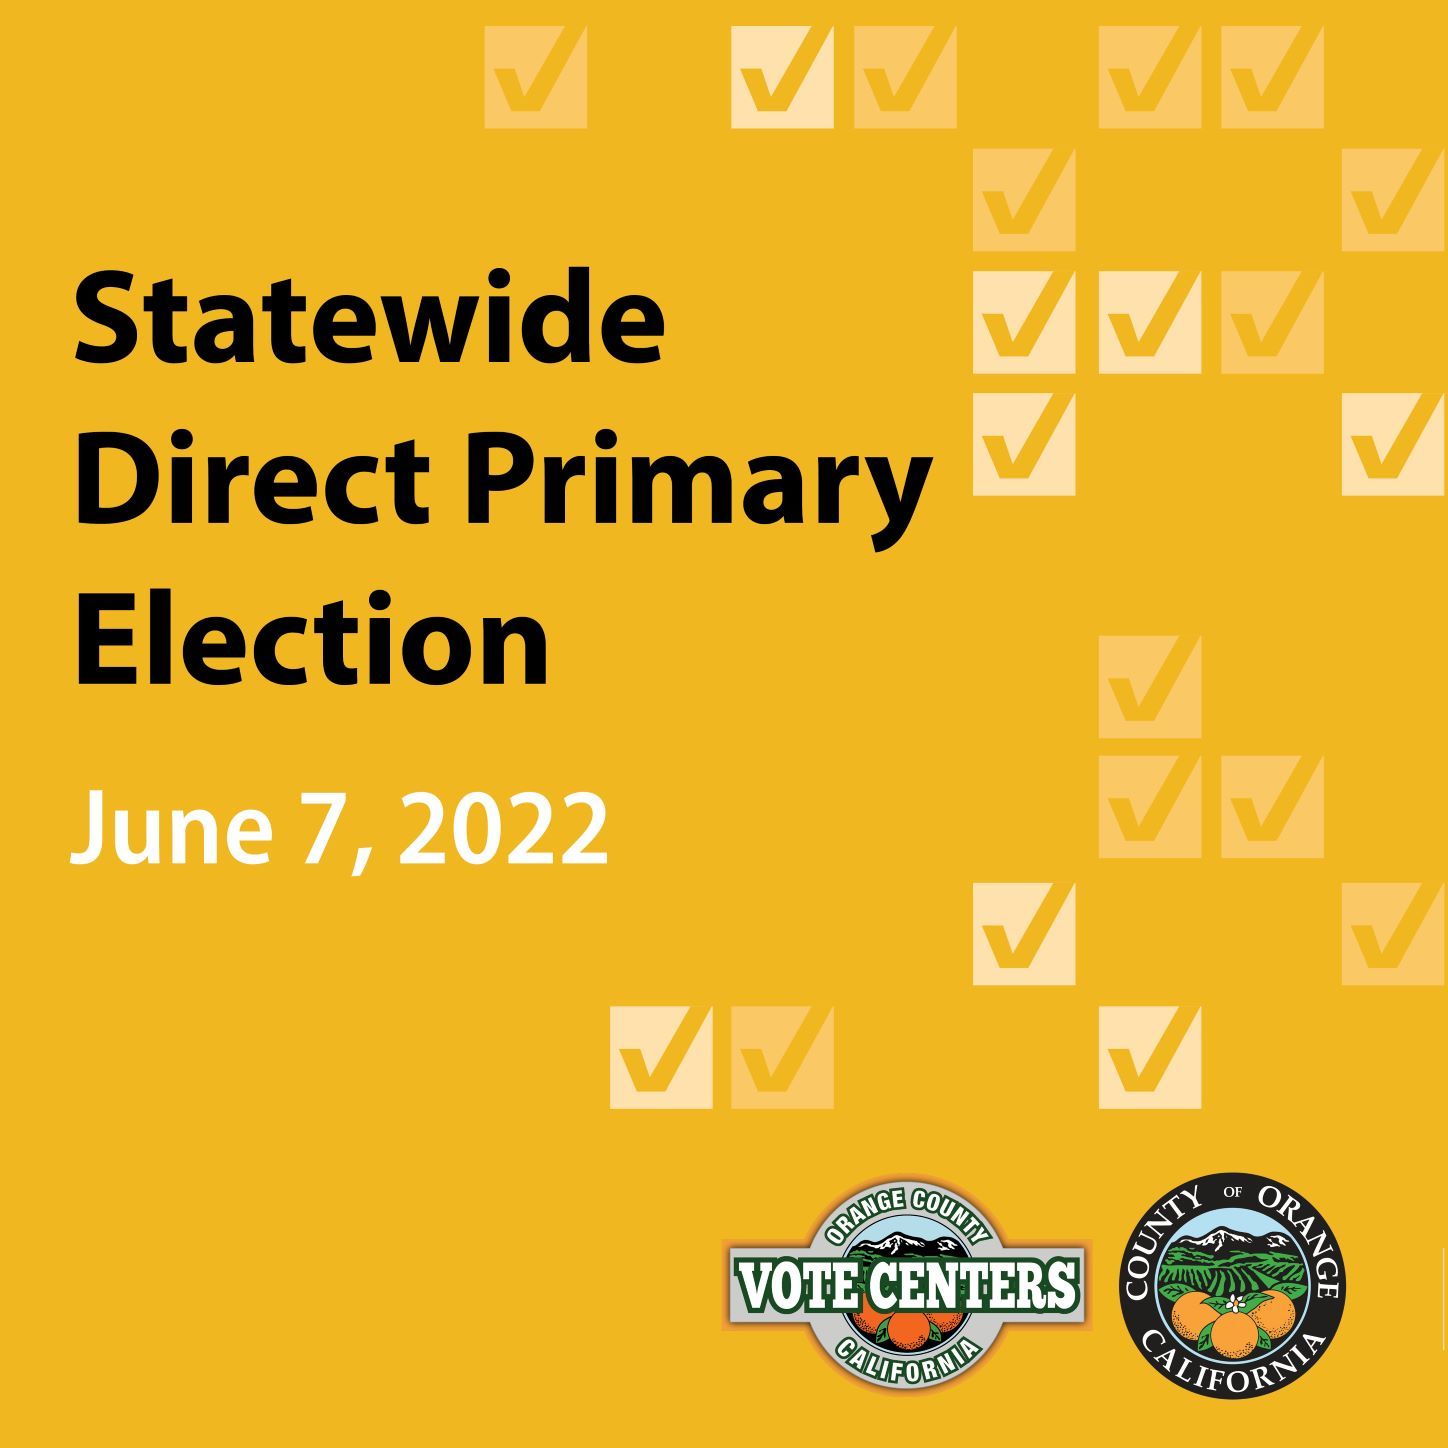 Statewide Direct Primary Election